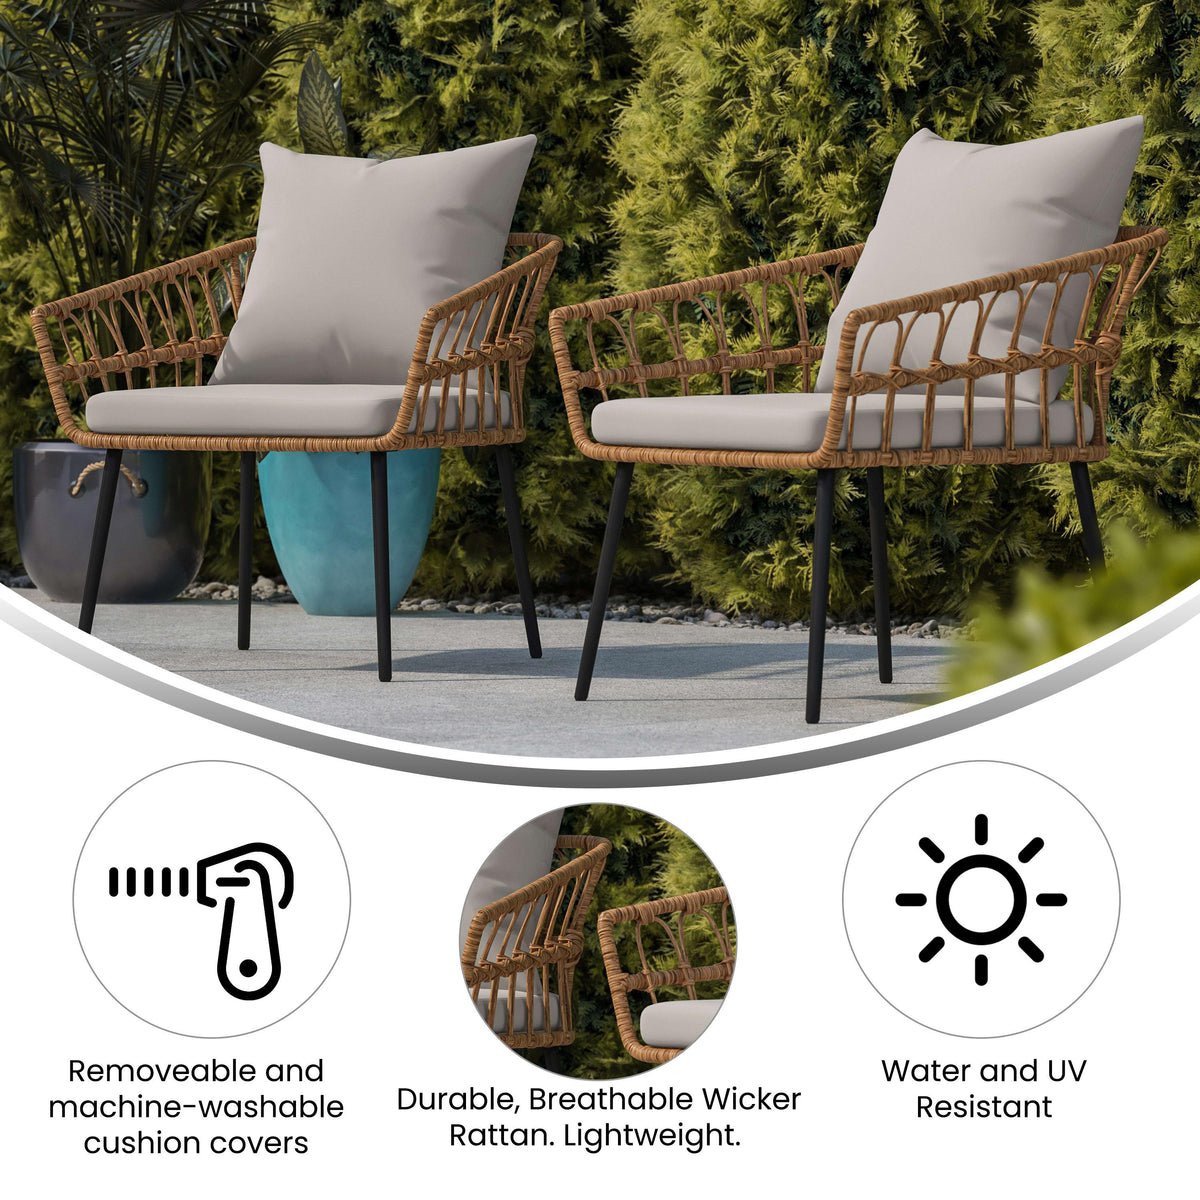 Gray Cushions/Natural Frame |#| All-Weather Natural PE Rattan Wicker Patio Chairs with Gray Cushions - 2 Pack